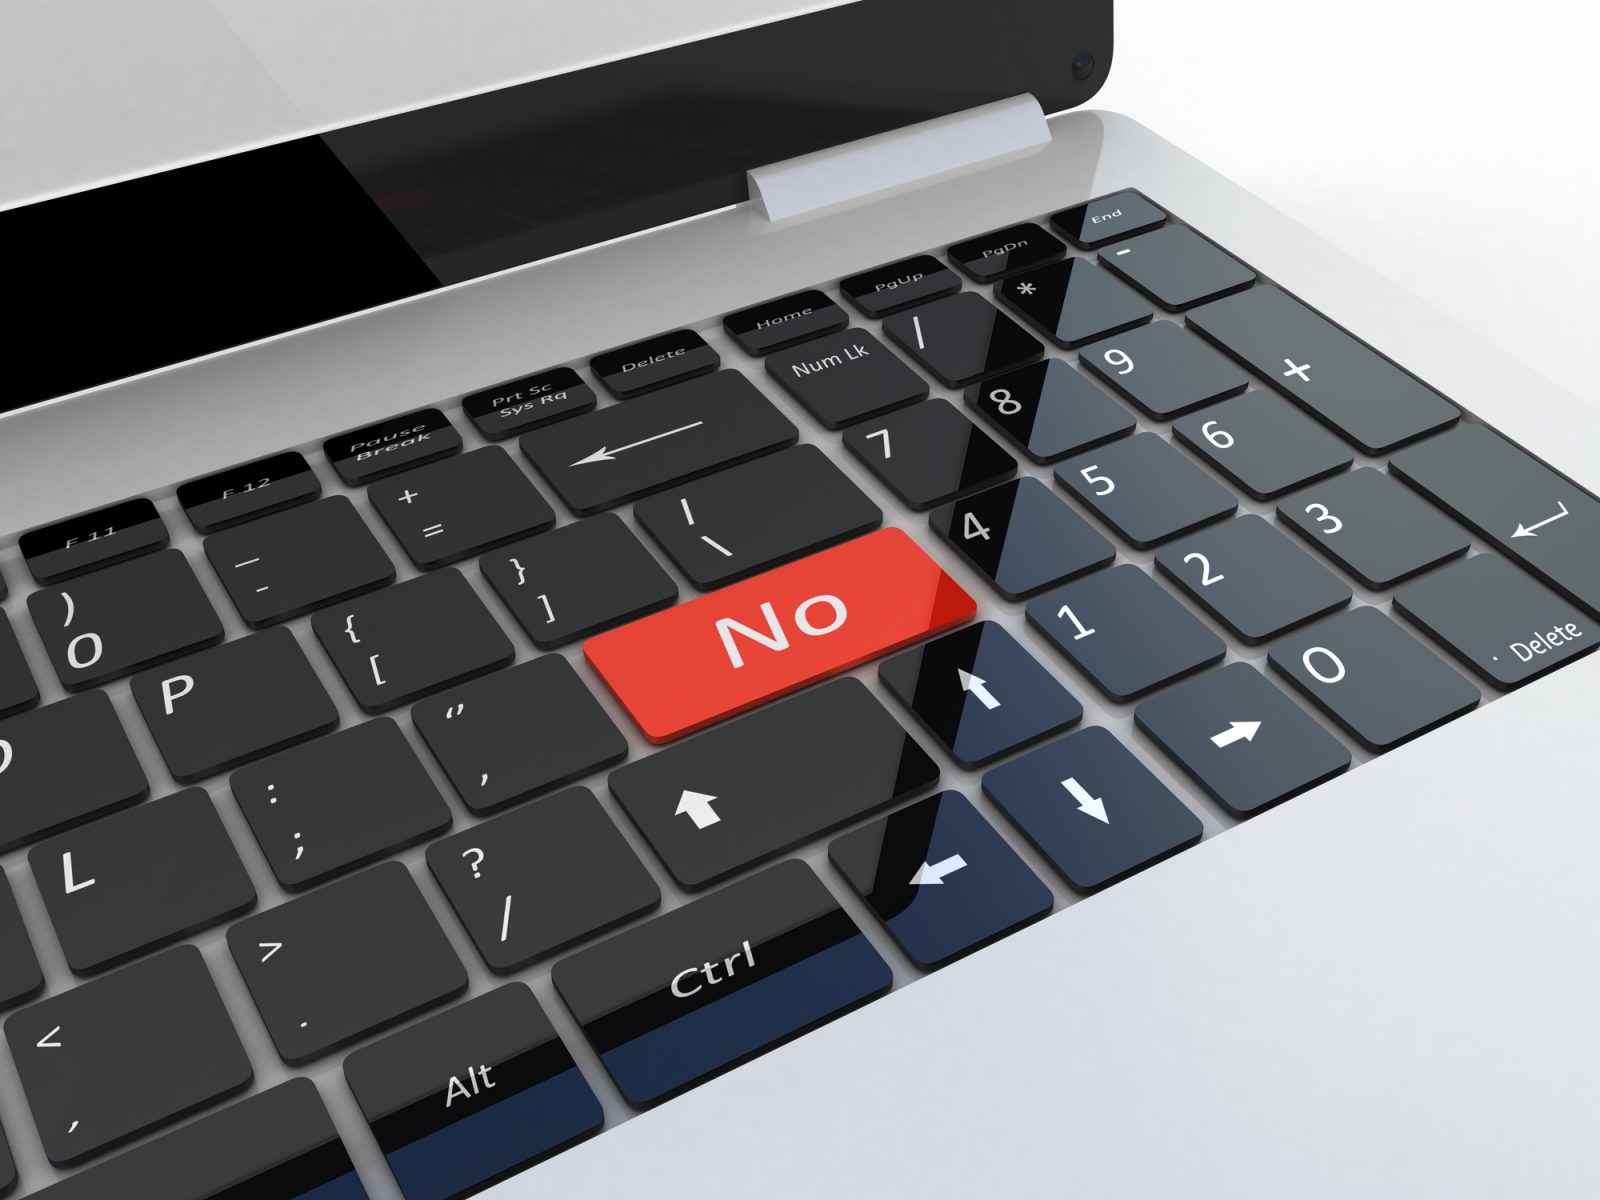 Close up image of a laptop keyboard with a red 'no' key